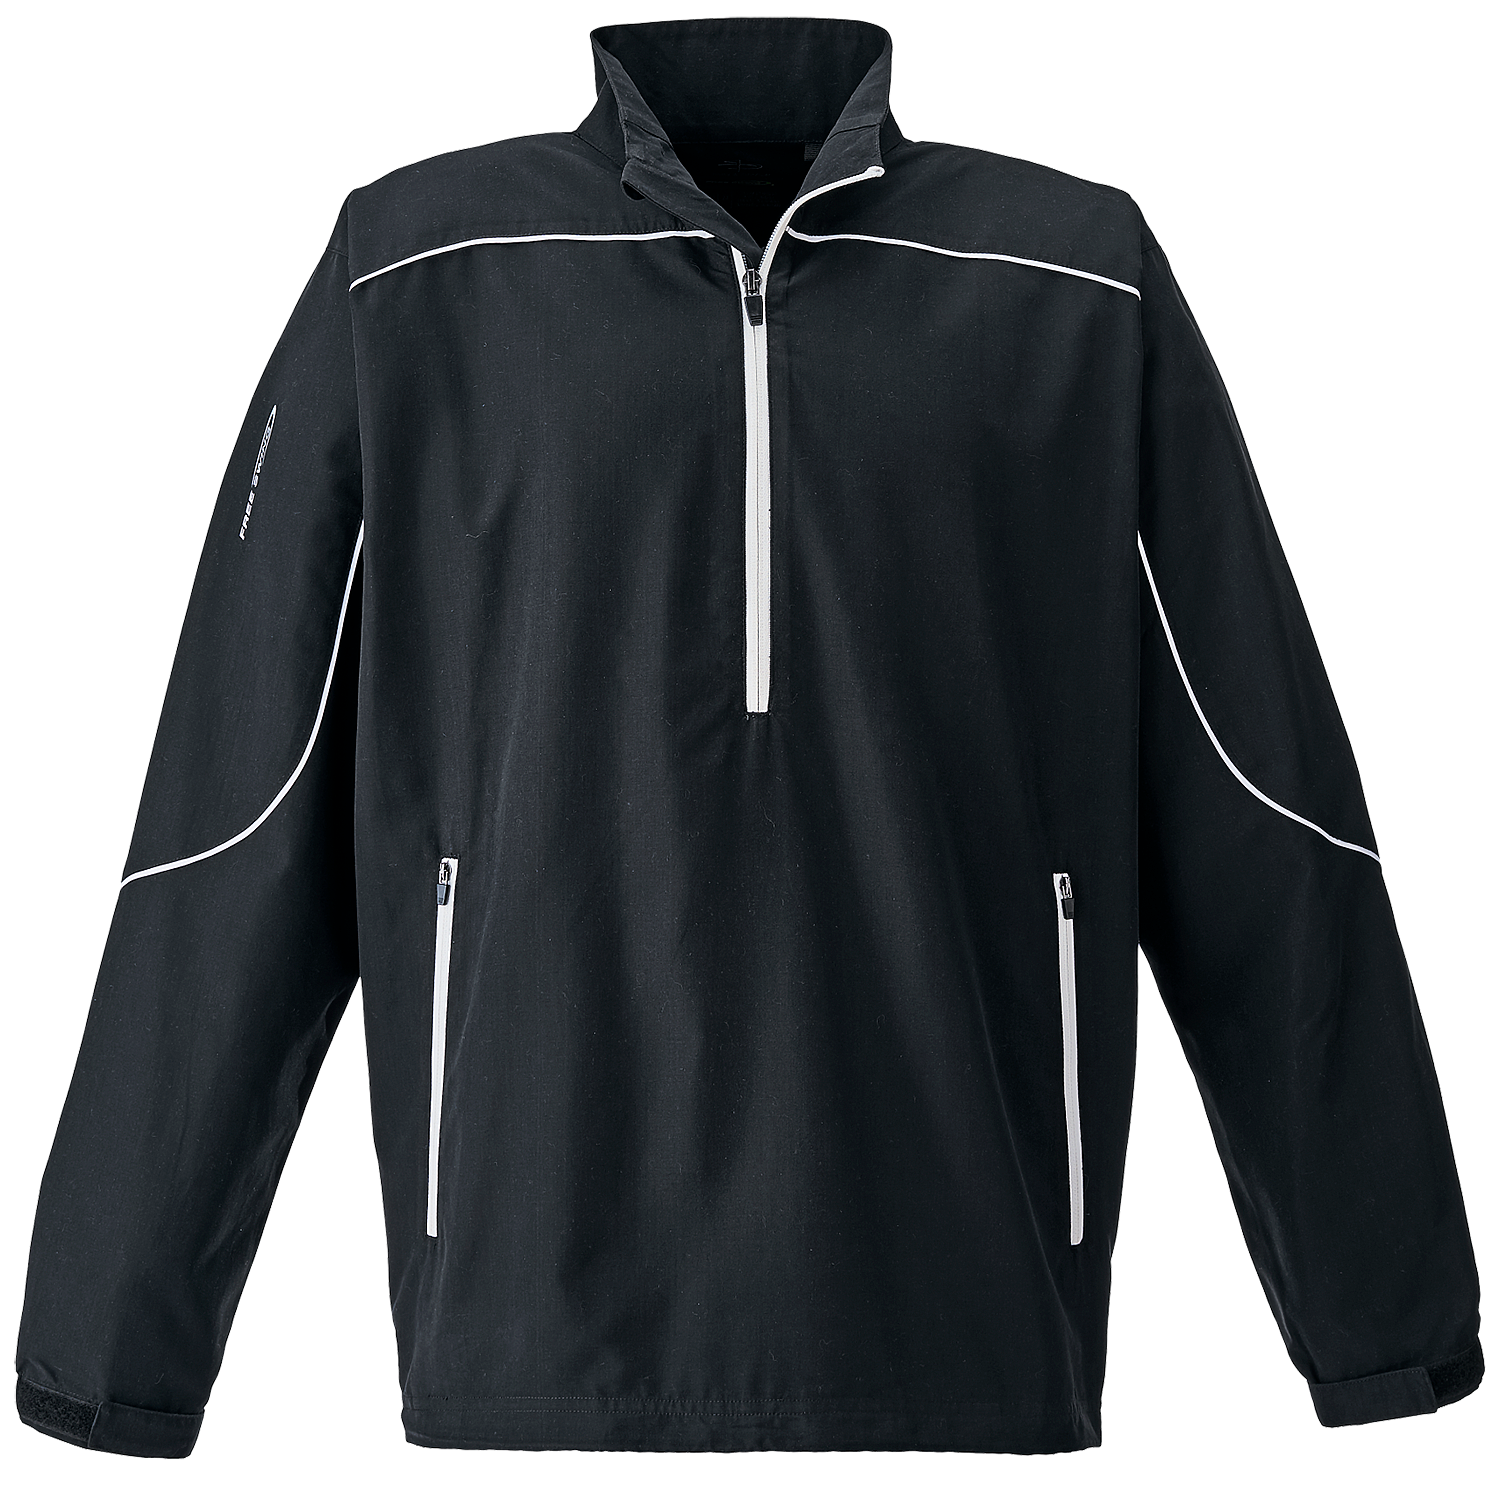 Page & Tuttle P1985 - Men's Free Swing Piped 1/4-Zip Windshirt